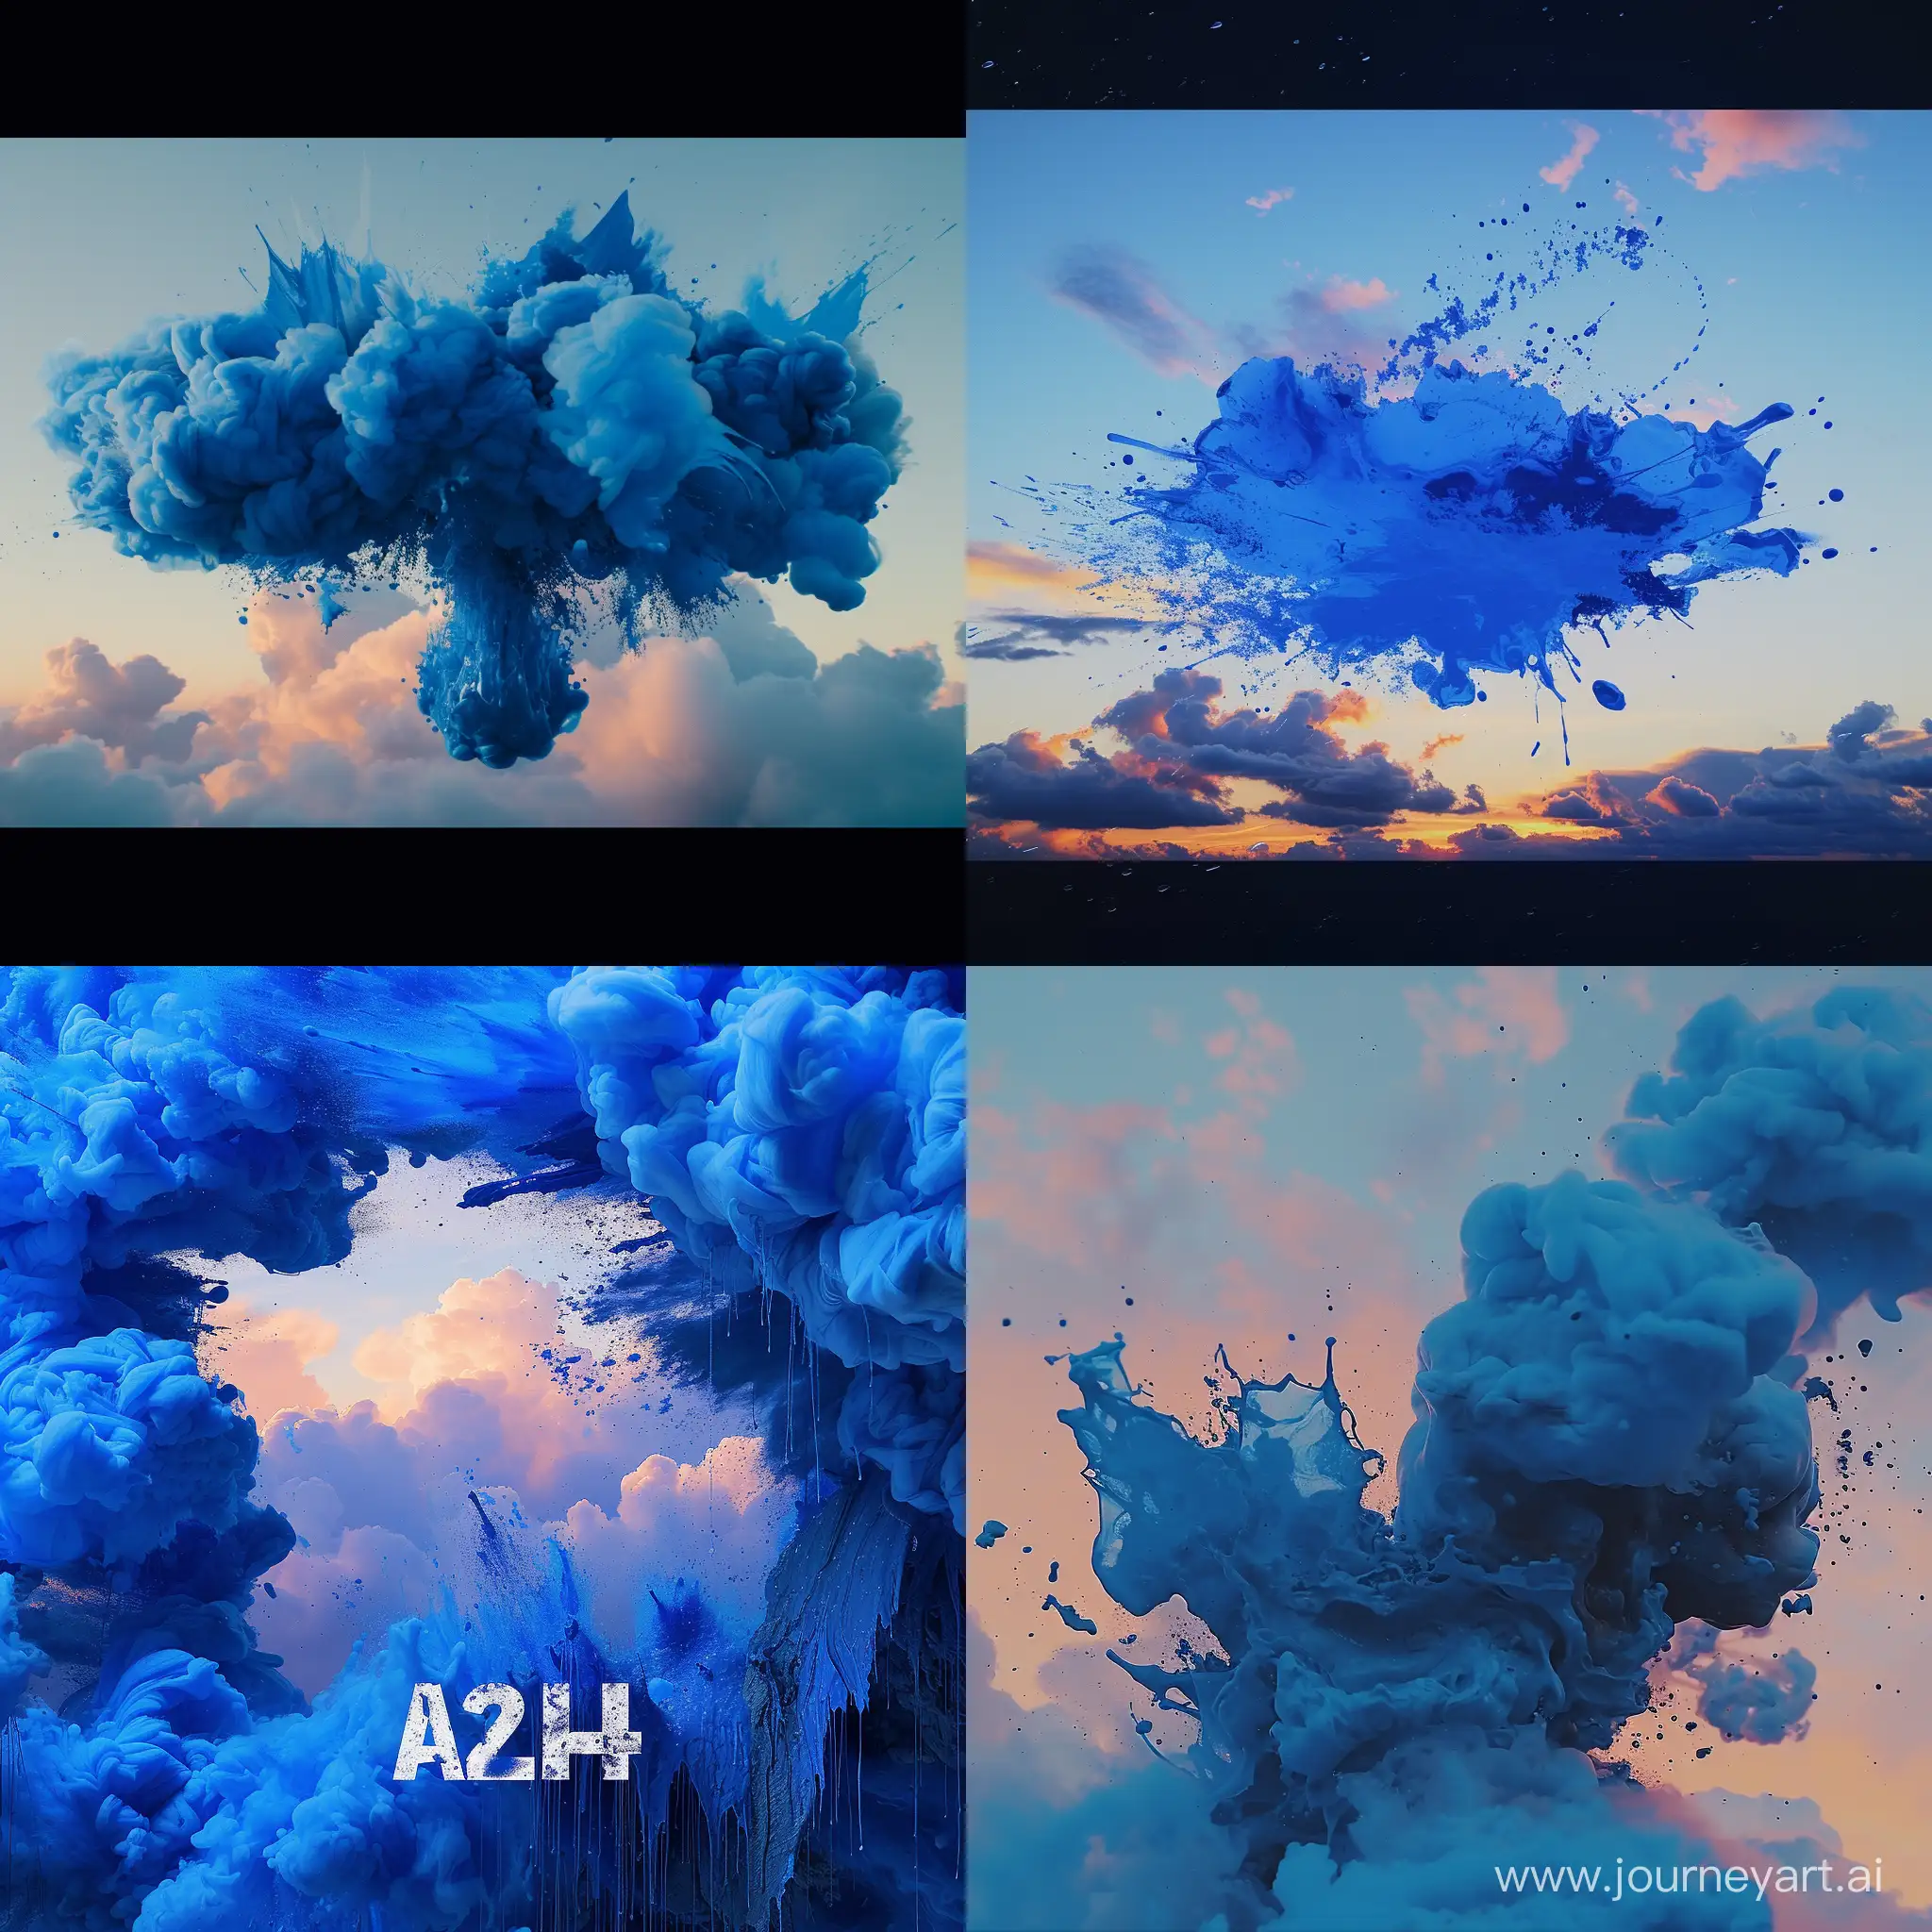 still photo of the cloud from a24 movie, film, artefacts of jpeg, sunset, dreamcore, dreamy, add some paint strike or splash across whole photo, with thick blue paint 